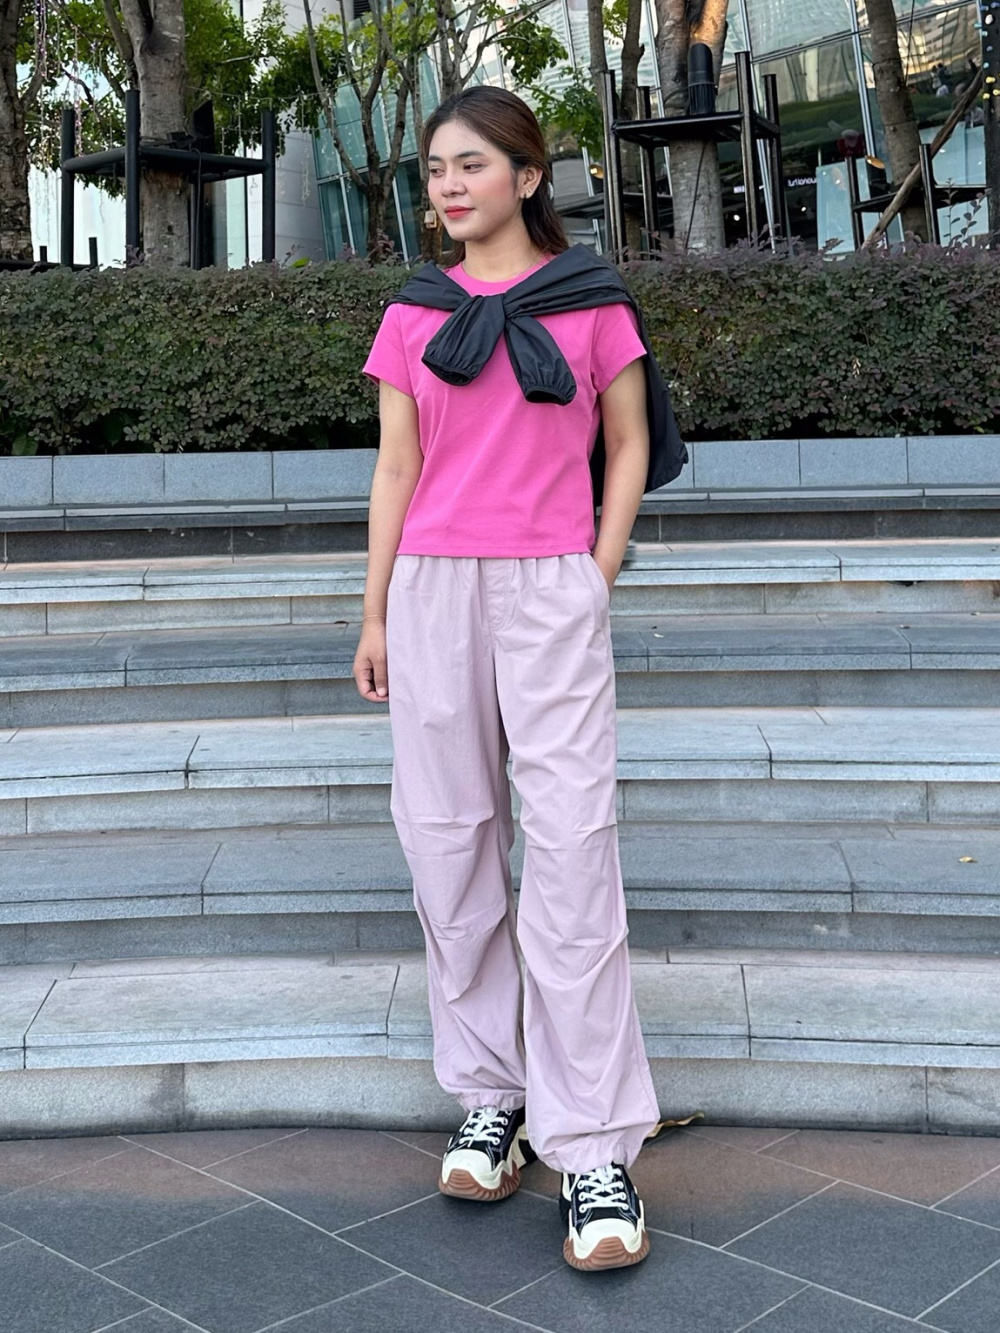 Check styling ideas for「Parachute Pants」